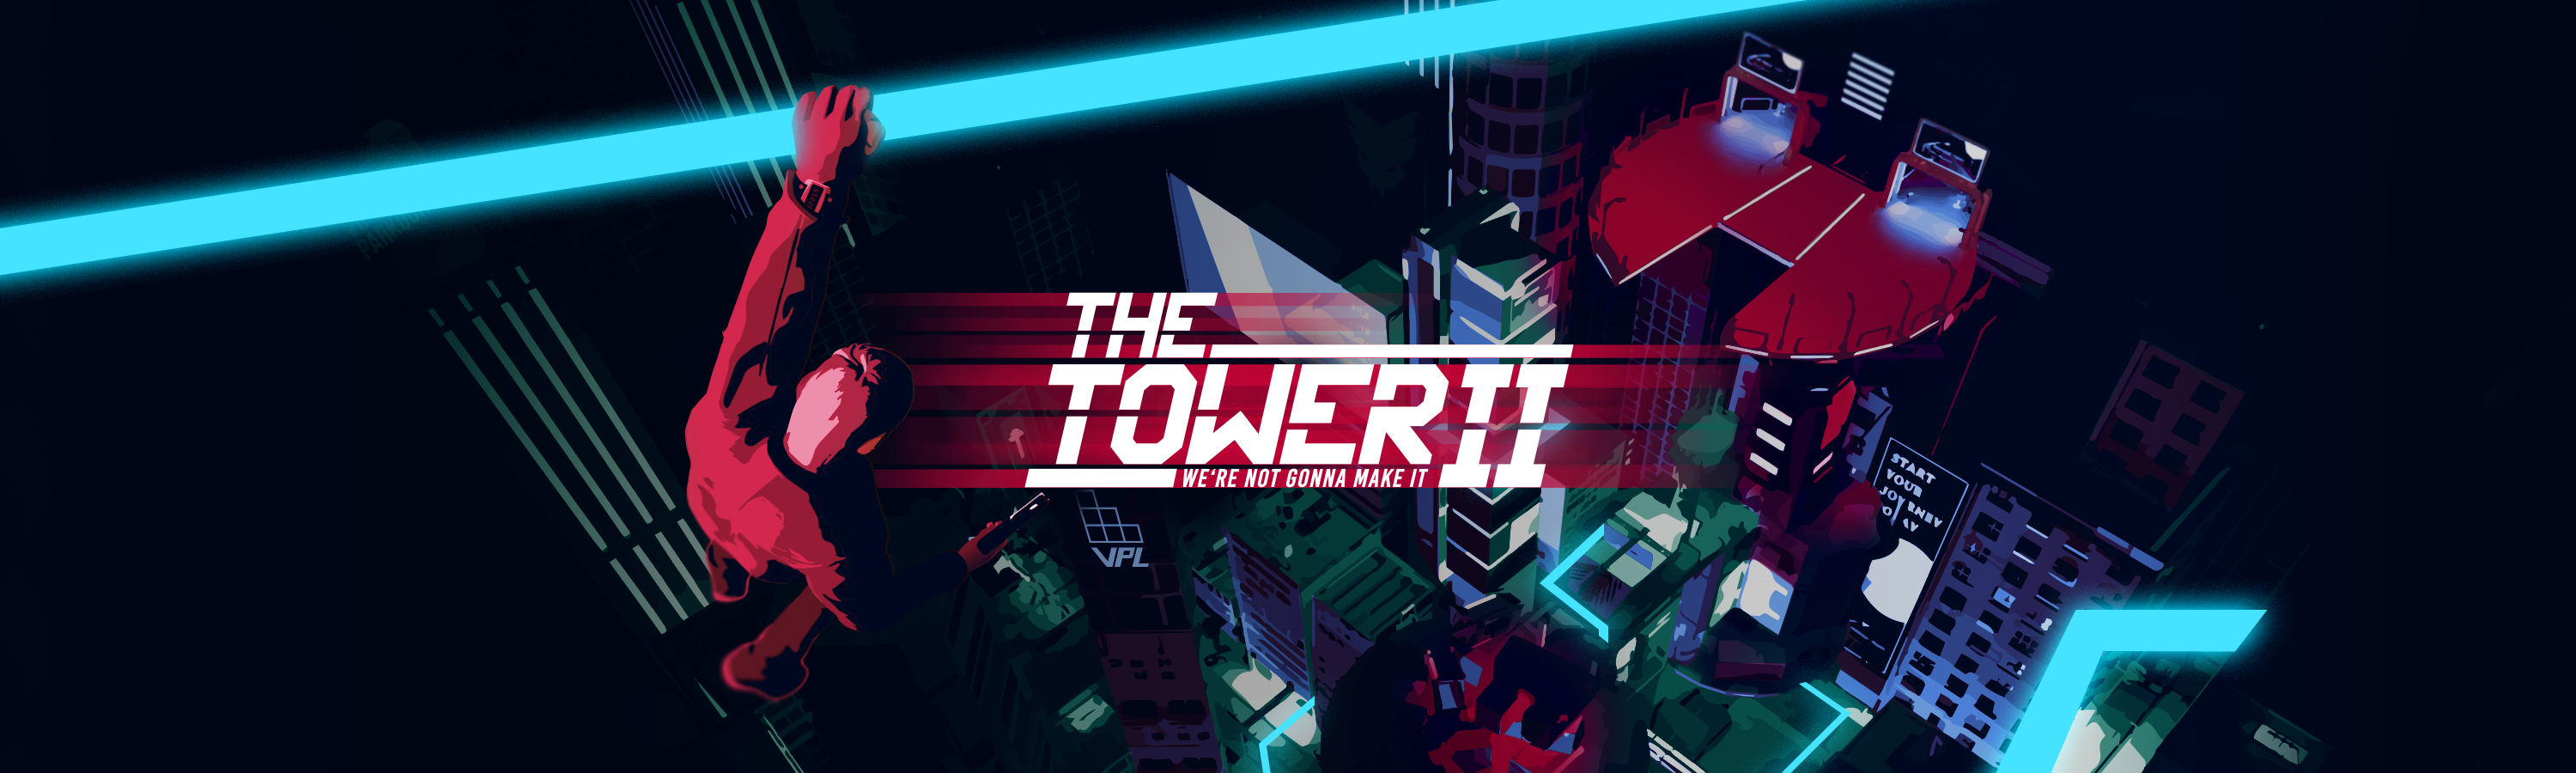 The Tower 2: Judgment Night